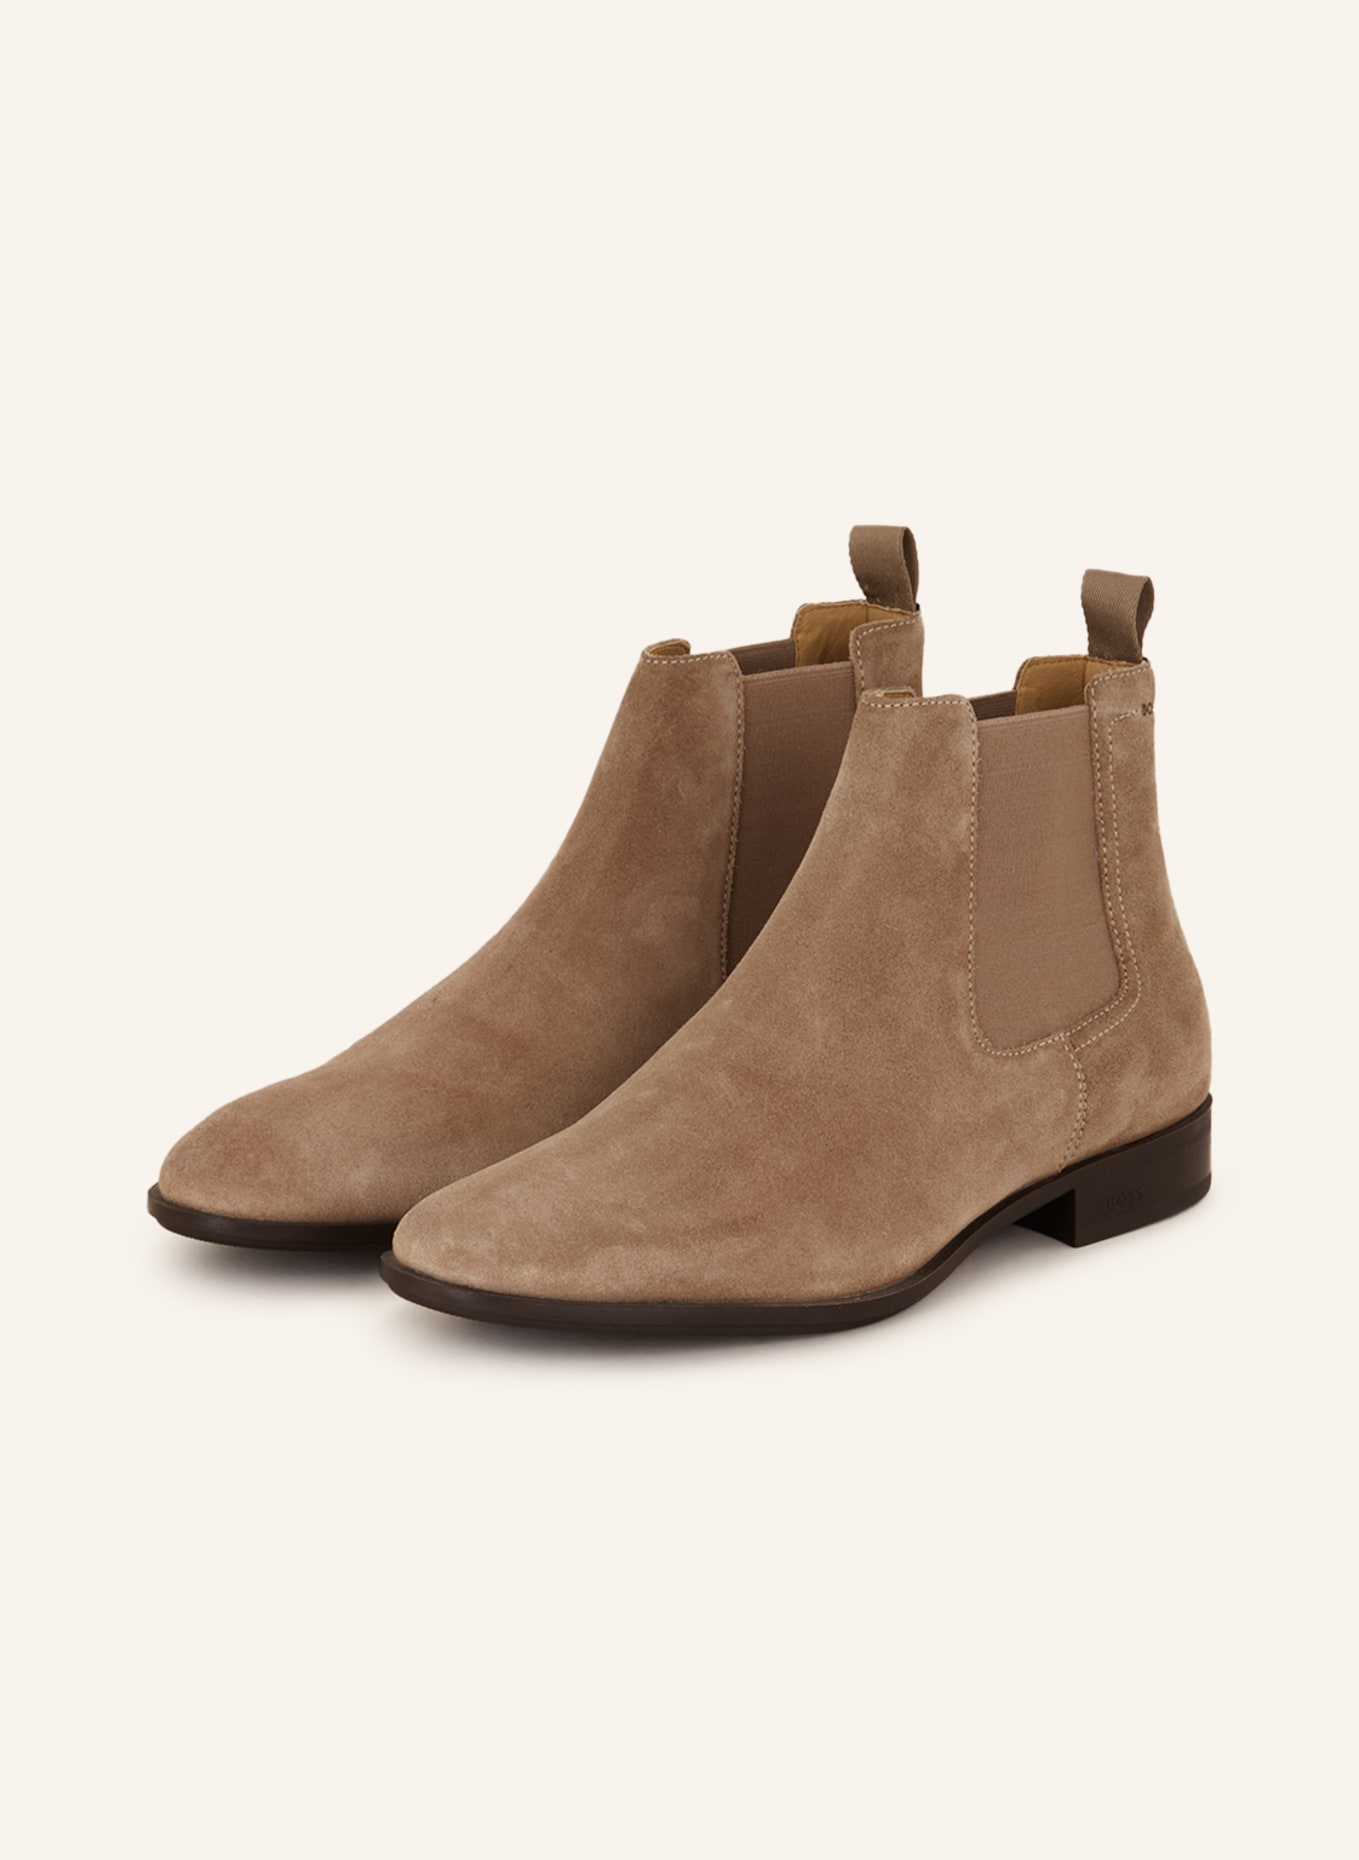 BOSS Chelsea-Boots COLBY, Farbe: BEIGE (Bild 1)